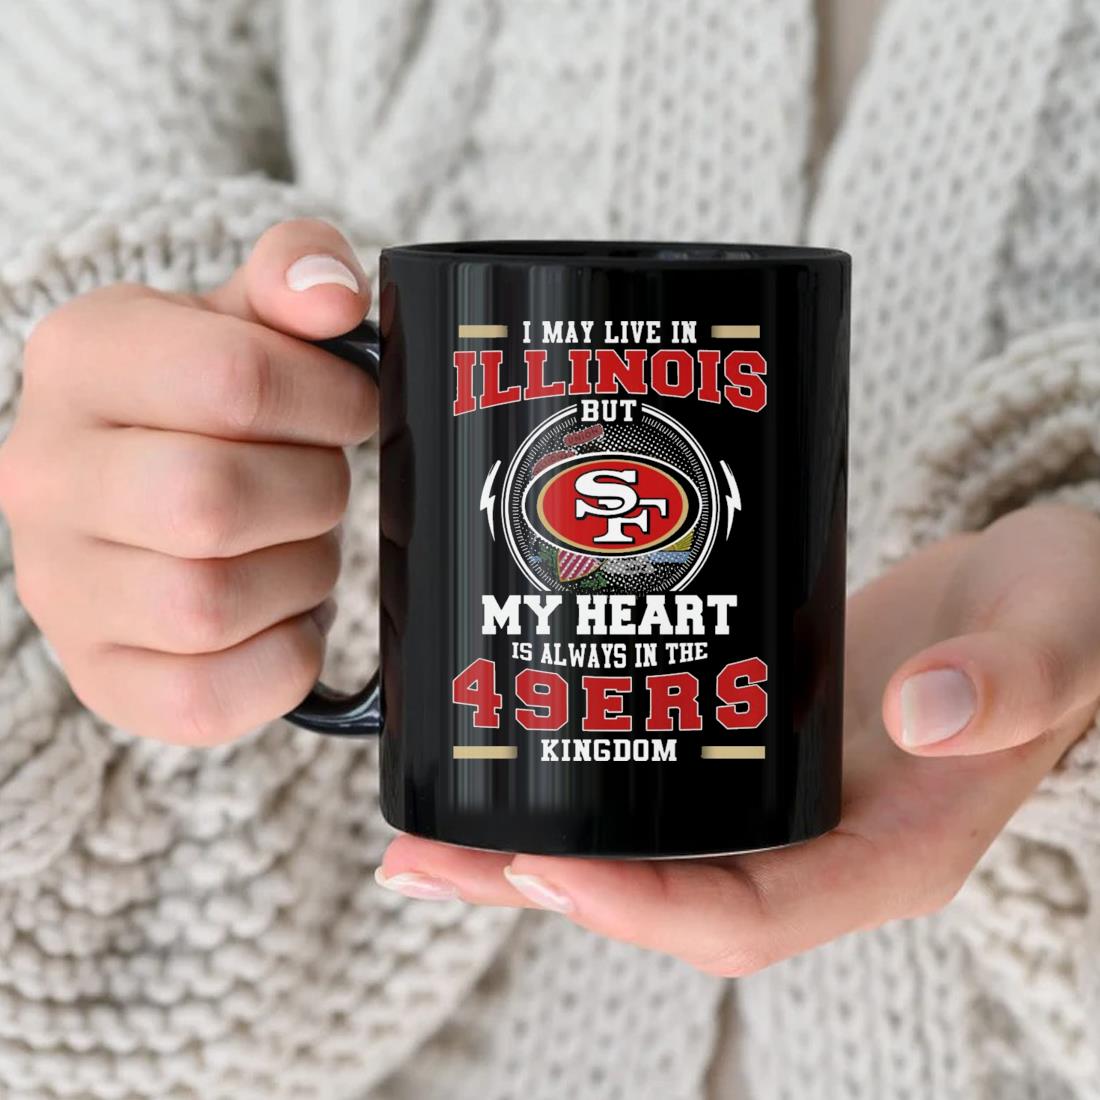 I May Live In Illinois But My Heart Is Always In The 49ers Kingdom Mug nhu